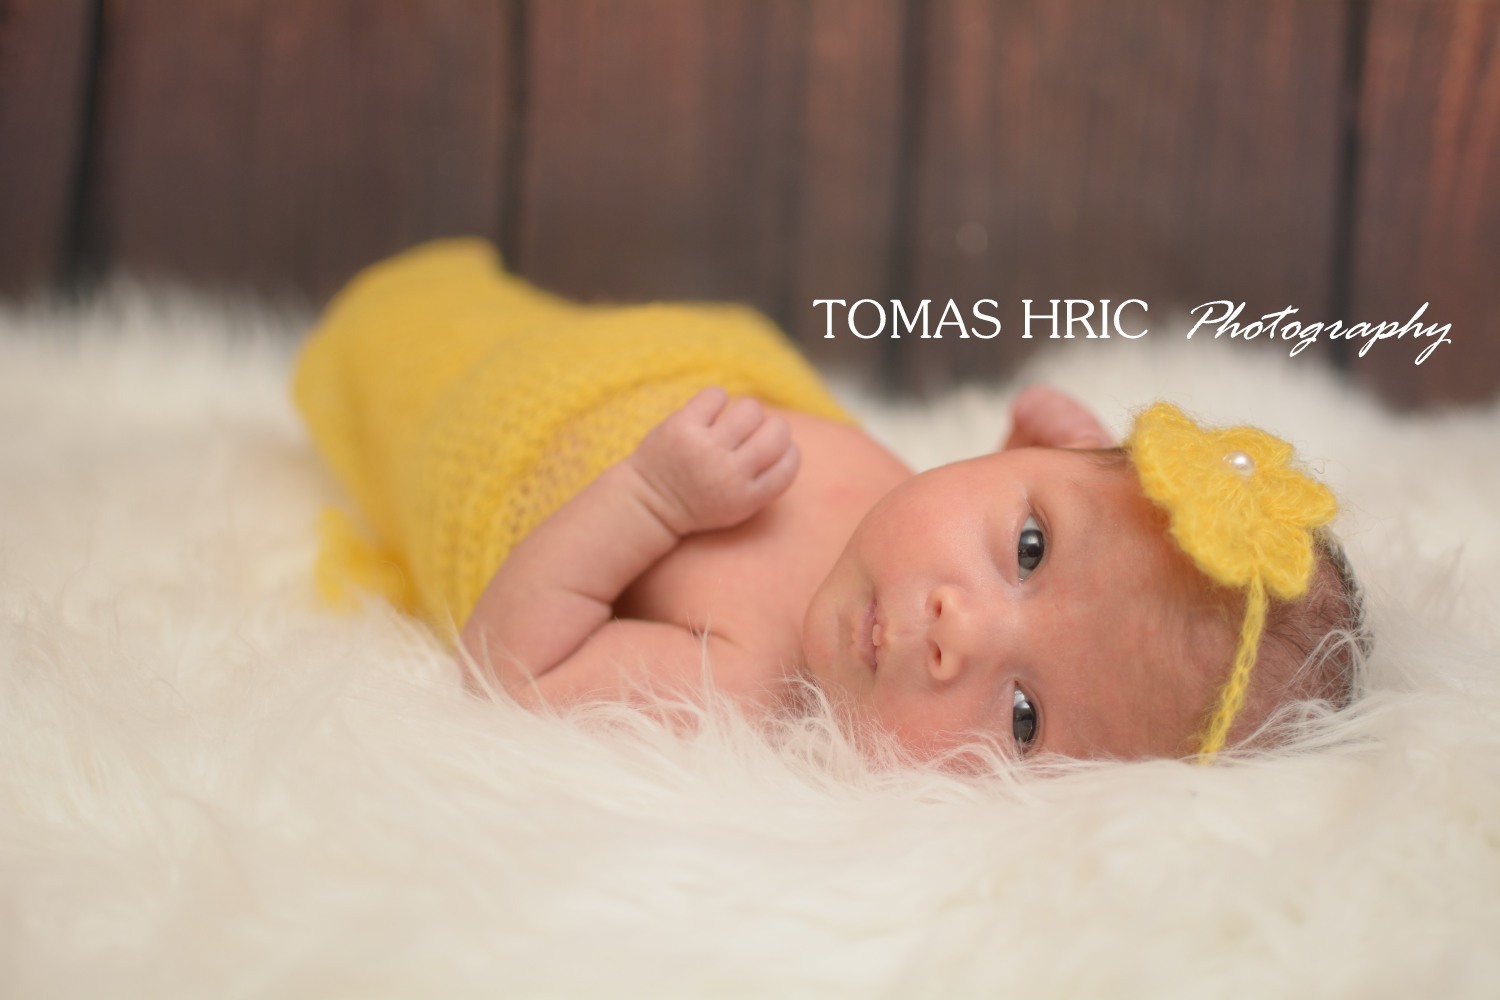 Tomas Hric Photography Northern Virginia Newborn photographer baby girl wrapped in a yellow wrap looking at the camera